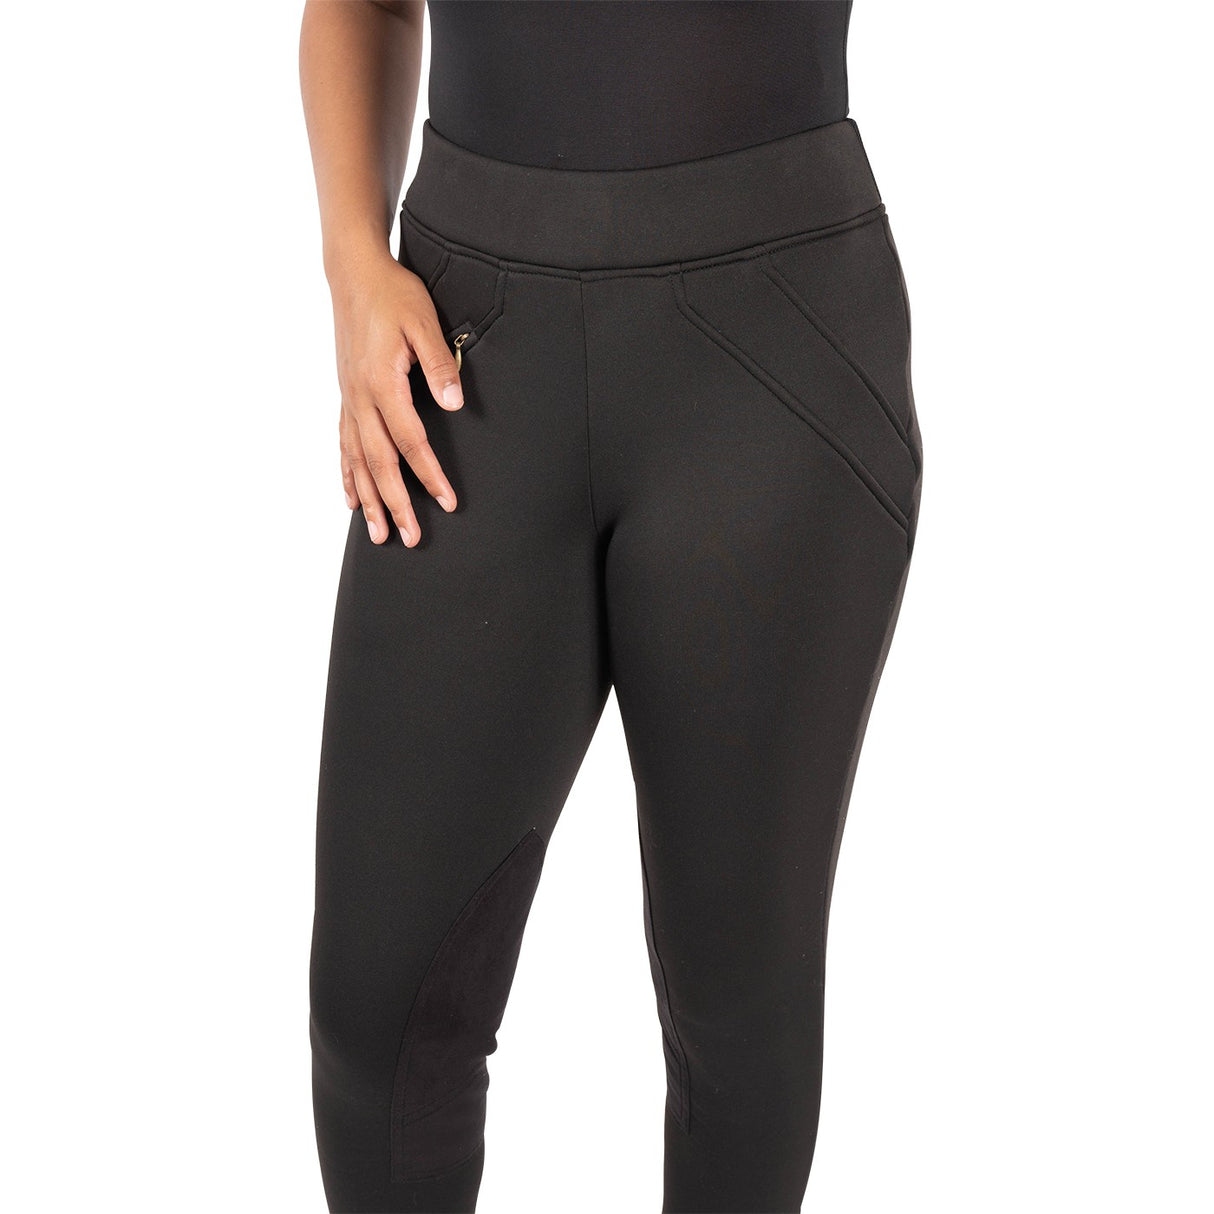 Elation Red Label Active Winter Tight